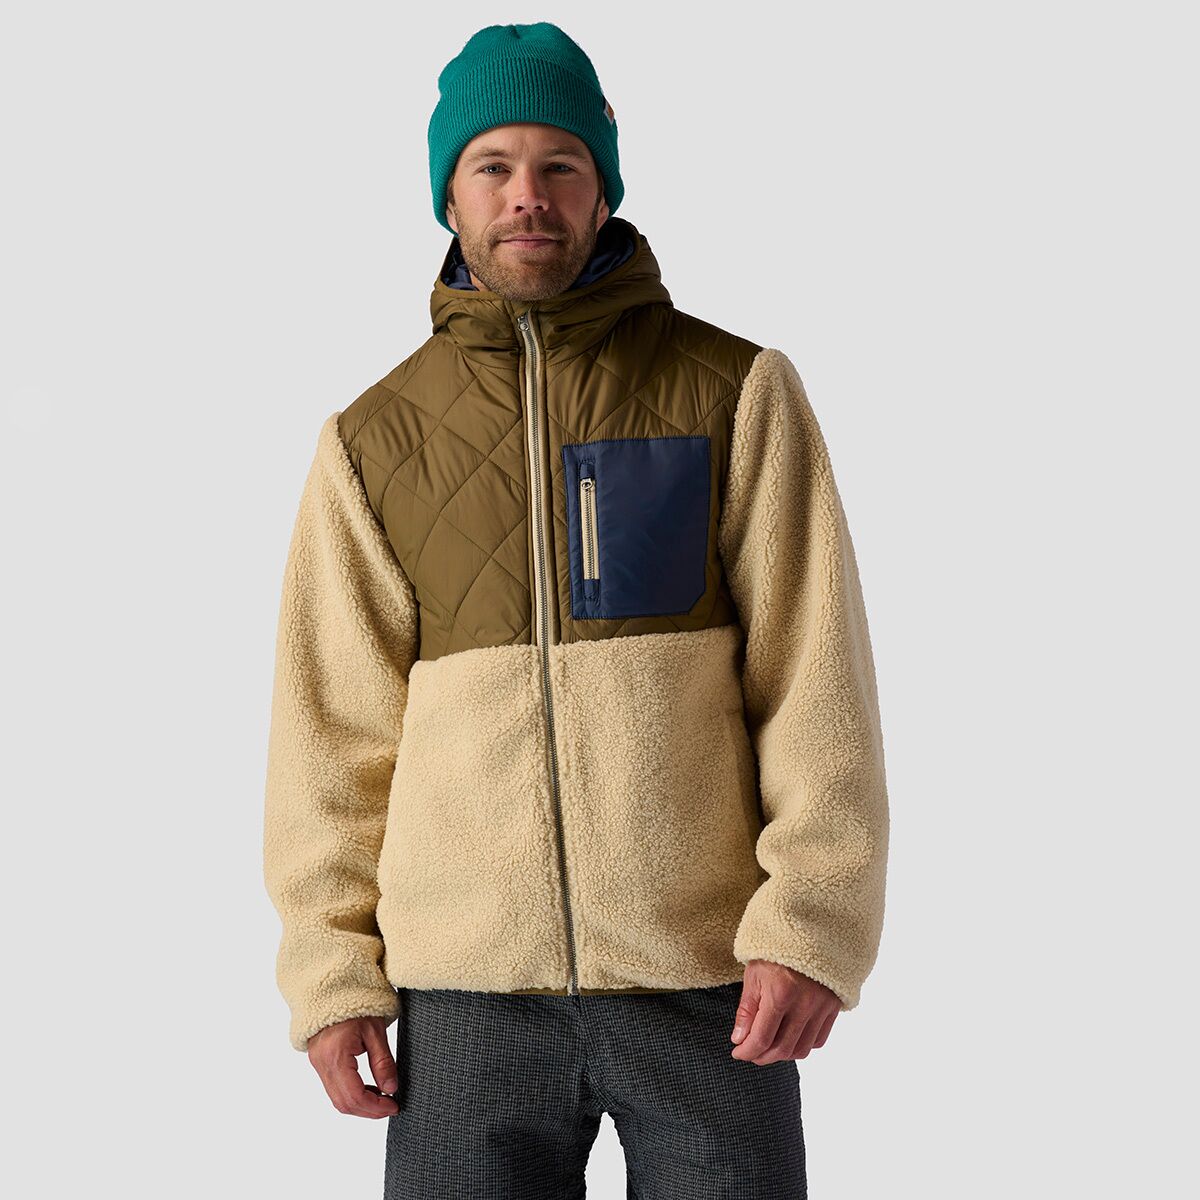 Stoic Crossover Hooded Jacket - Men's